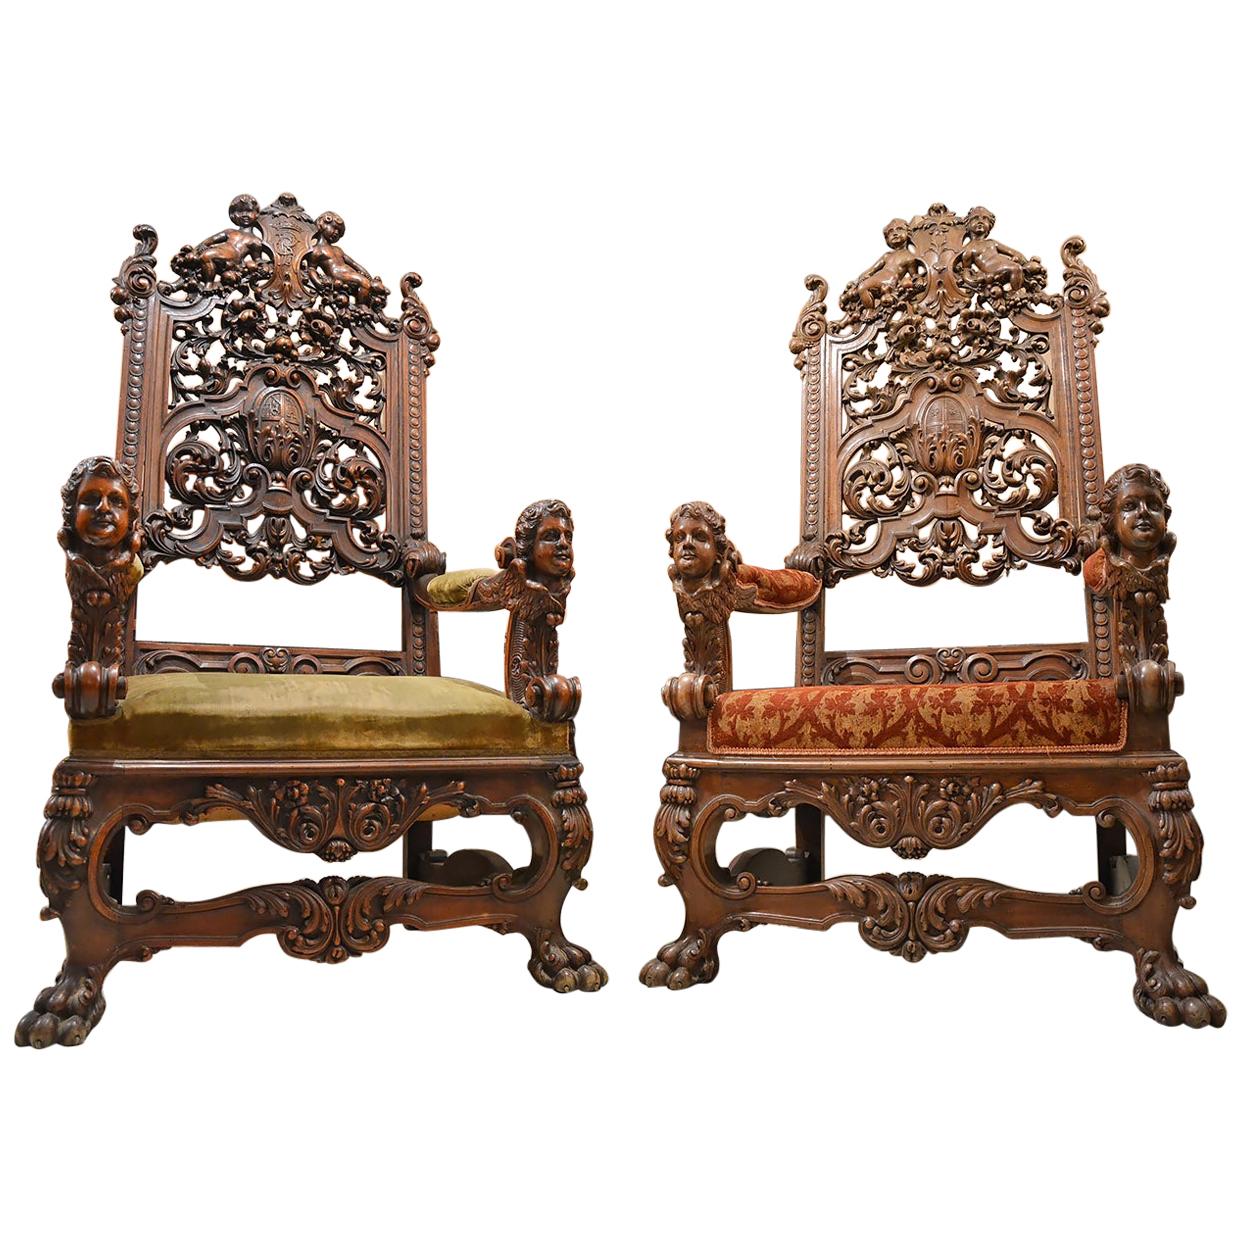 19th Century Baroque Revival Carved Walnut Armchair, Set of Two